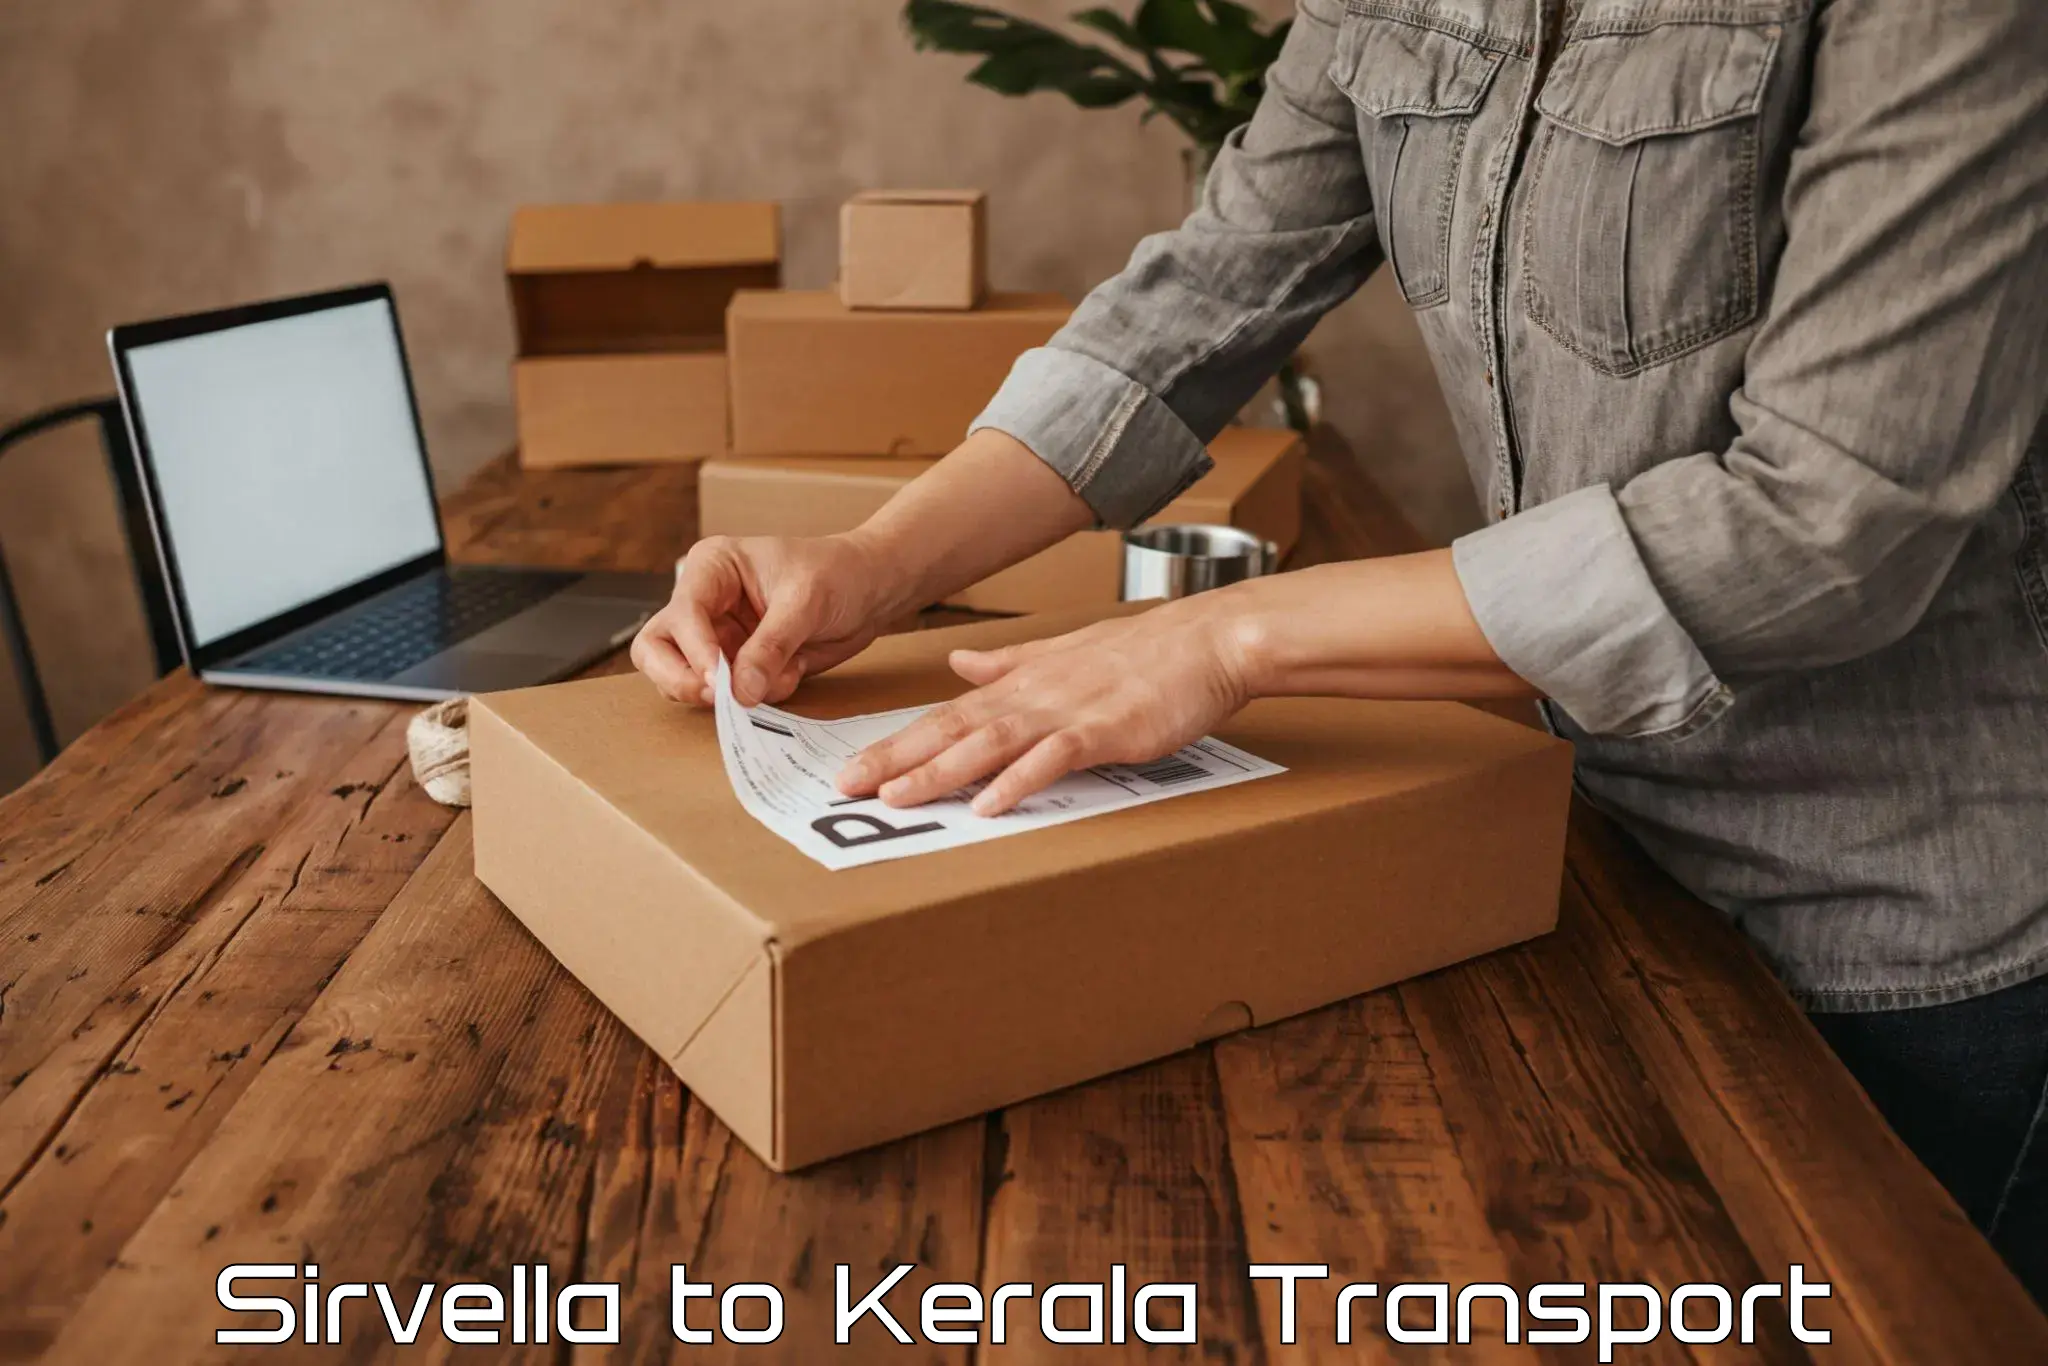 Air freight transport services Sirvella to Nochad